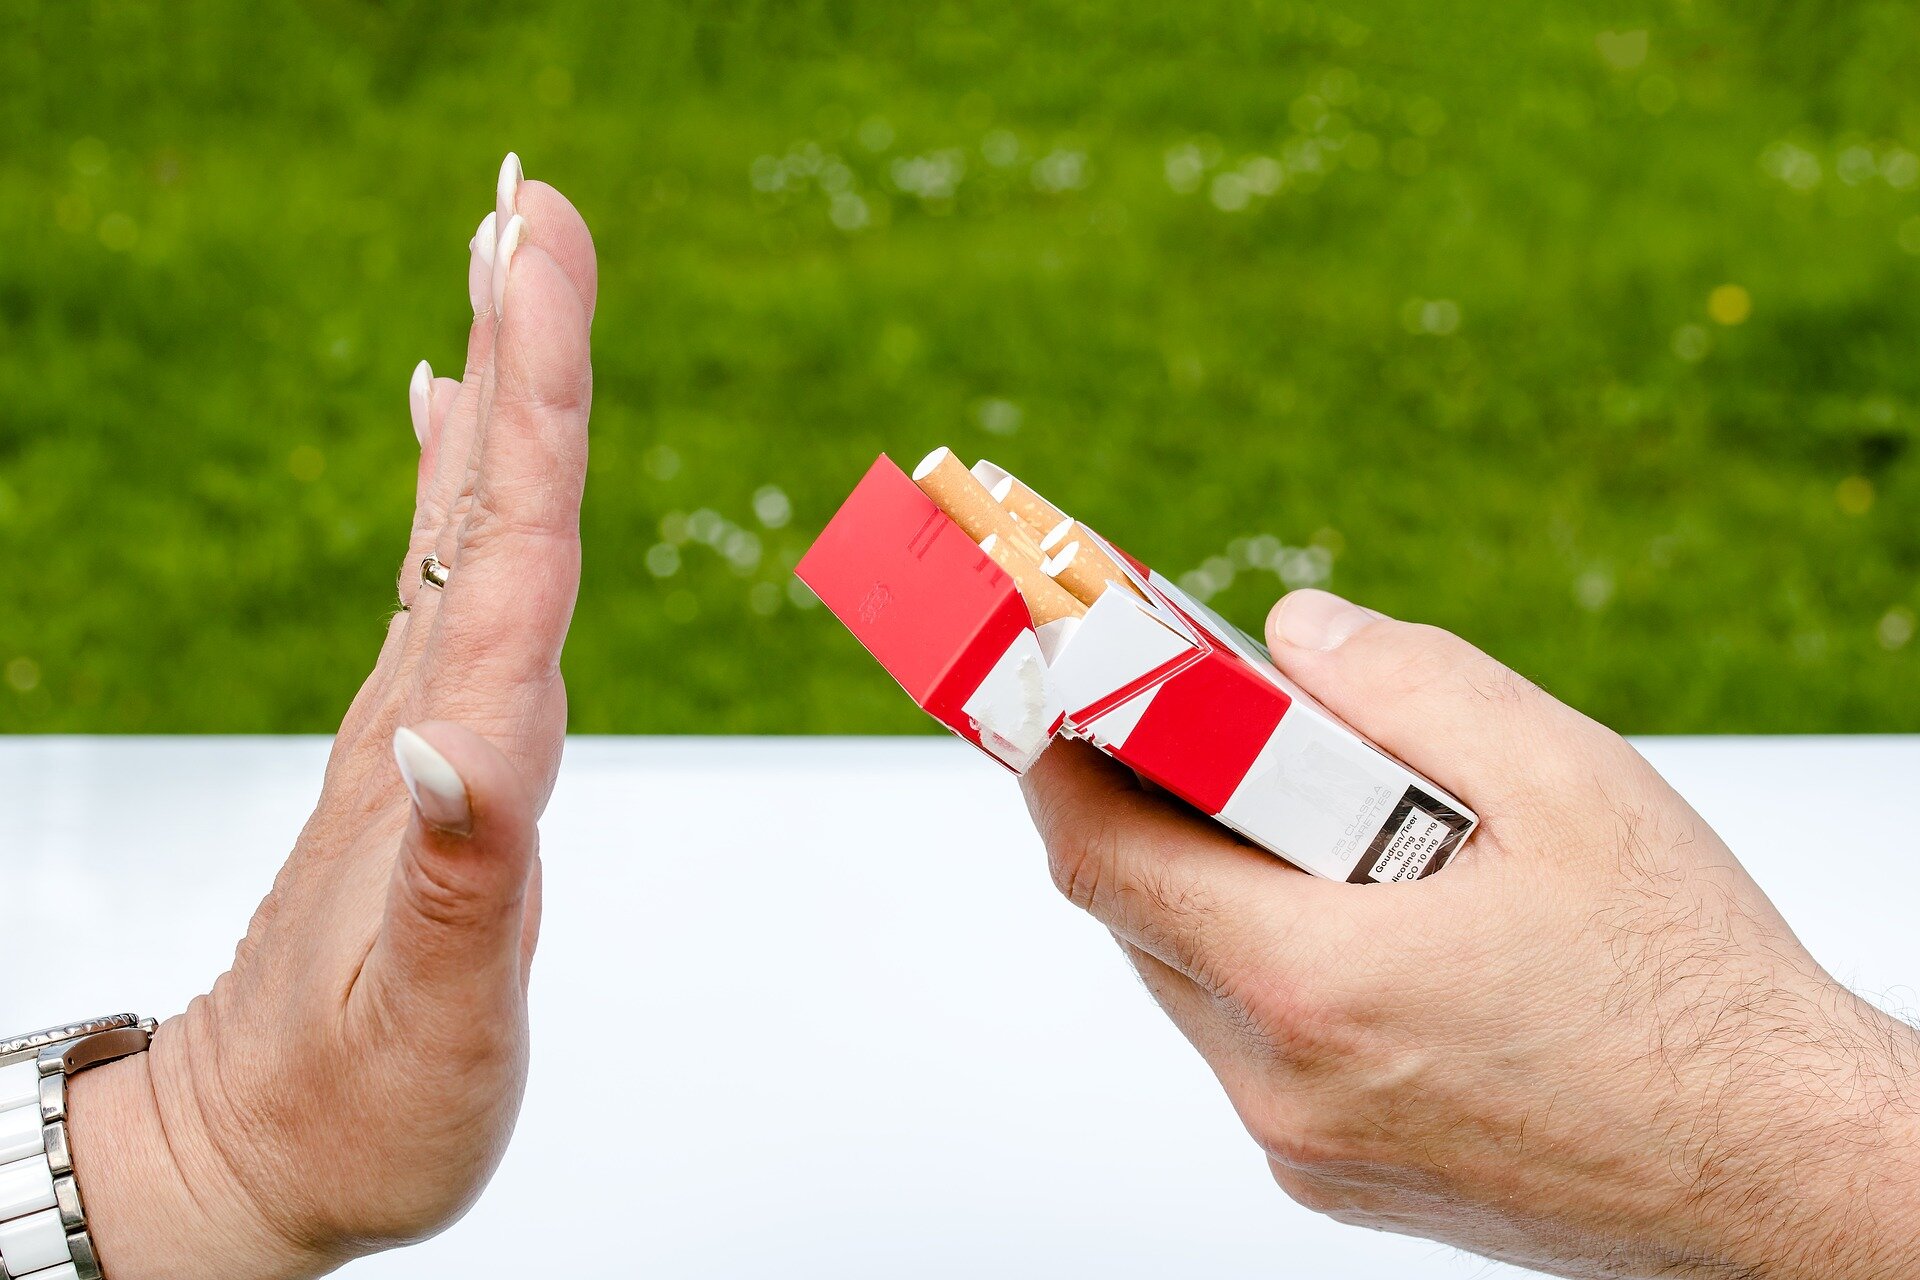 Combination of varenicline and nicotine lozenges was found to increase smoking abstinence